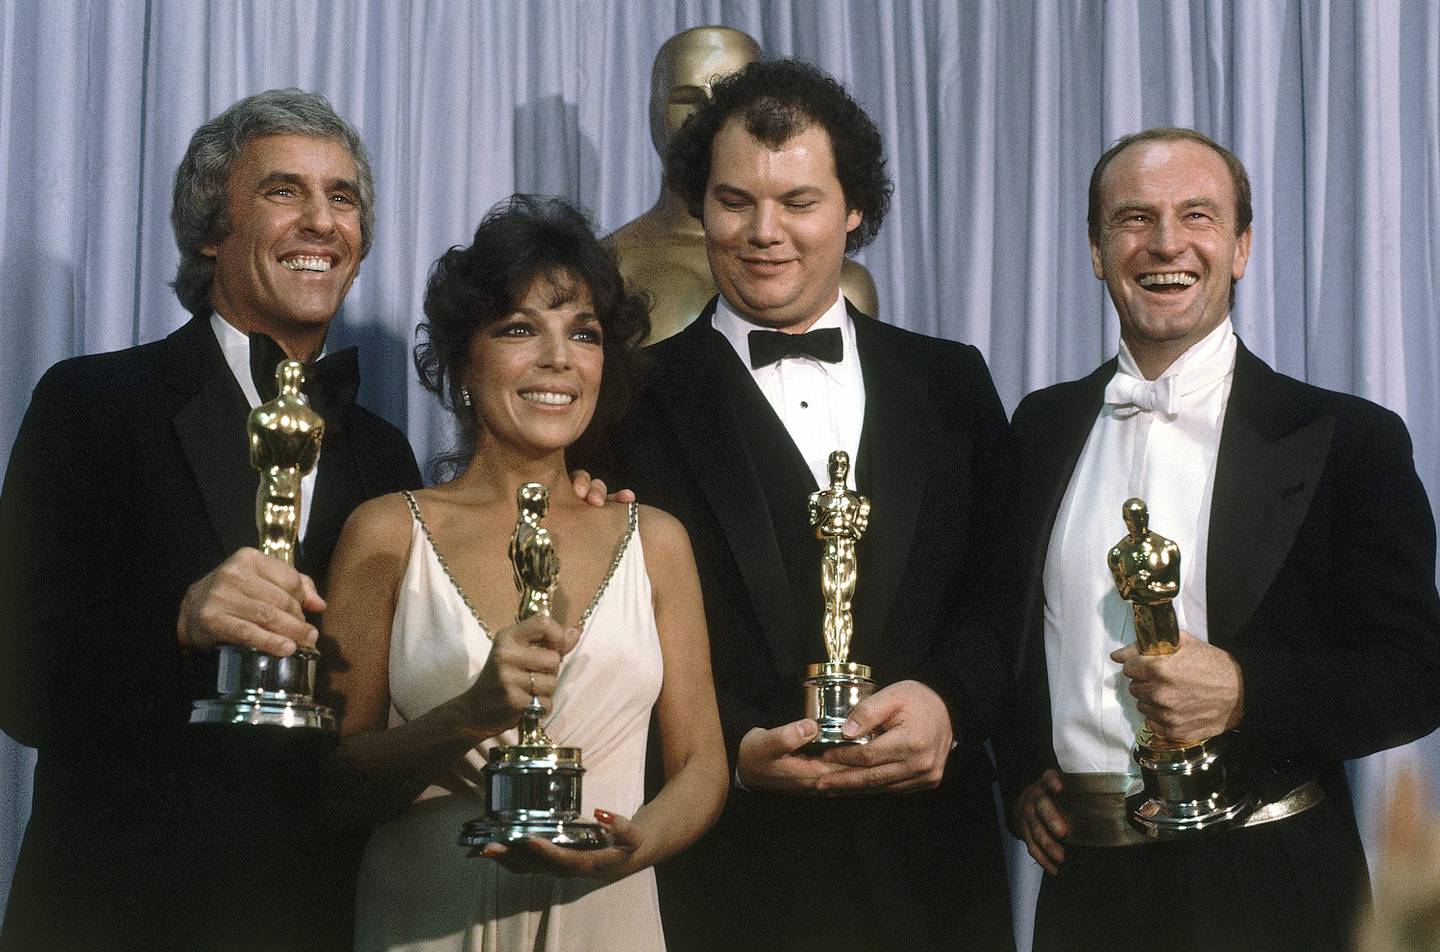 Burt Bacharach, from left, appears with Carole Bayer Sager, Christopher Cross and Peter Allen, winners of the Oscar for best original song "Arthur's Theme (Best That You Can Do)" at the 54th Annual Academy Awards in Los Angeles on March 29, 1982.